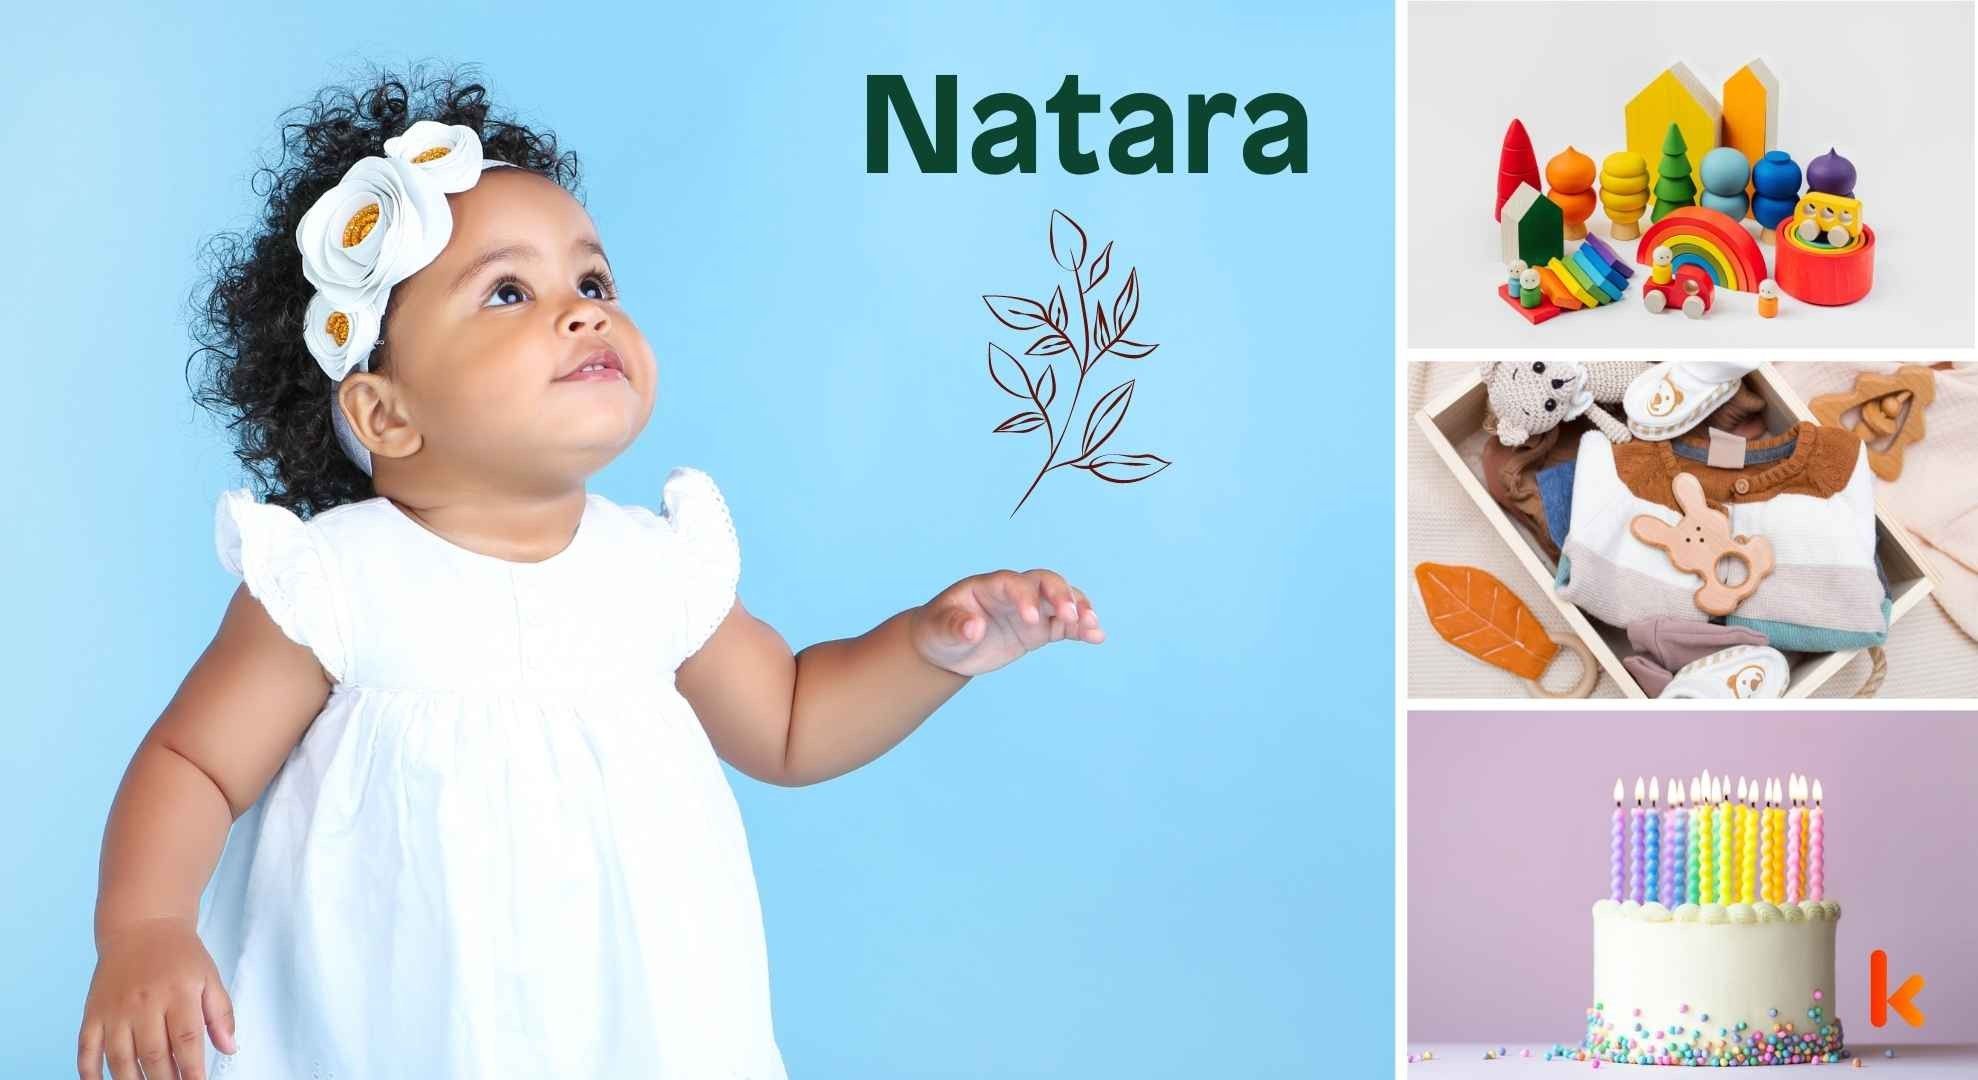 Meaning of the name Natara